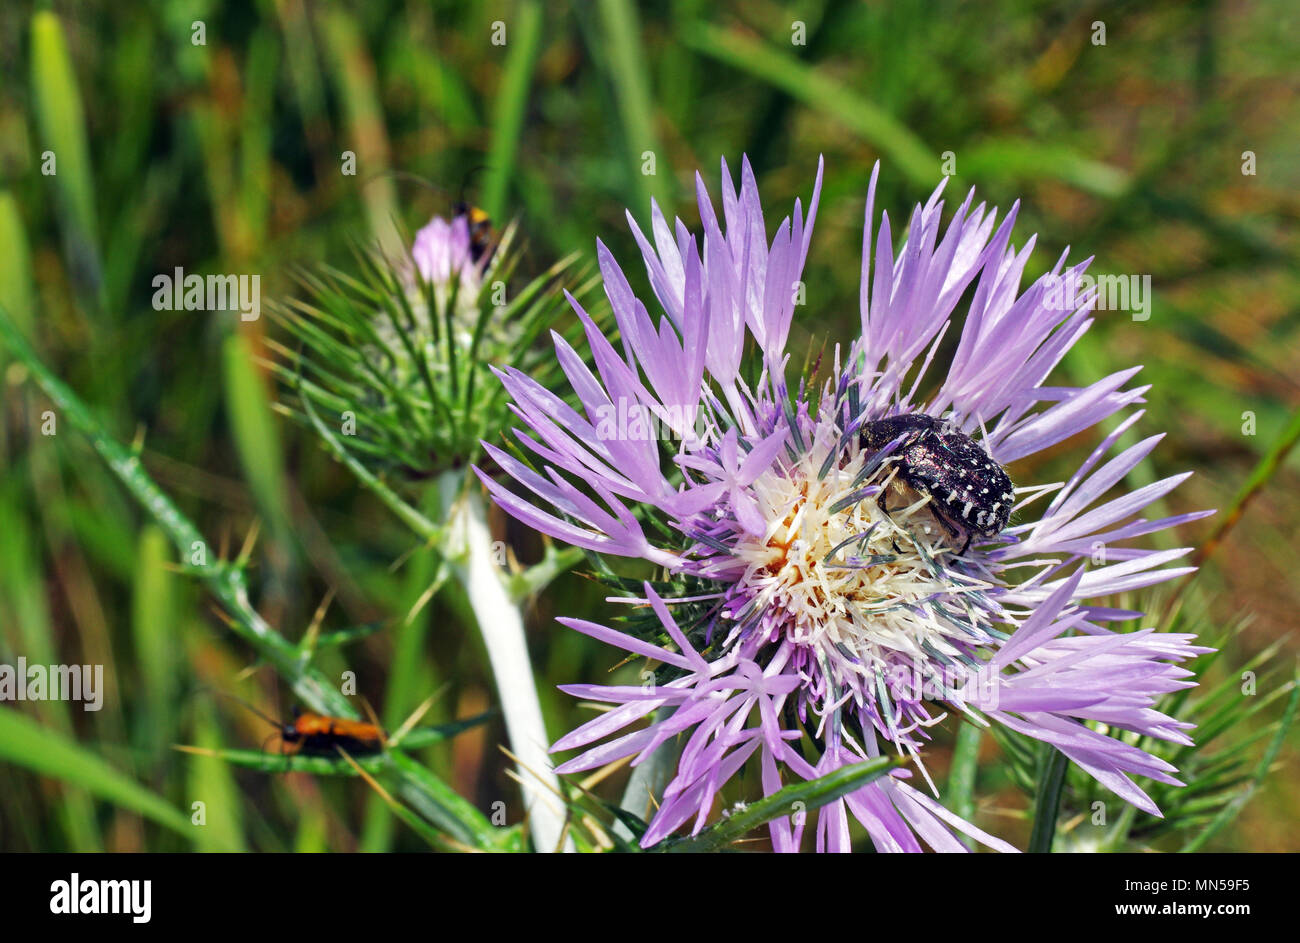 Wild thistle (galactites tomentosa) with insect close-up Stock Photo